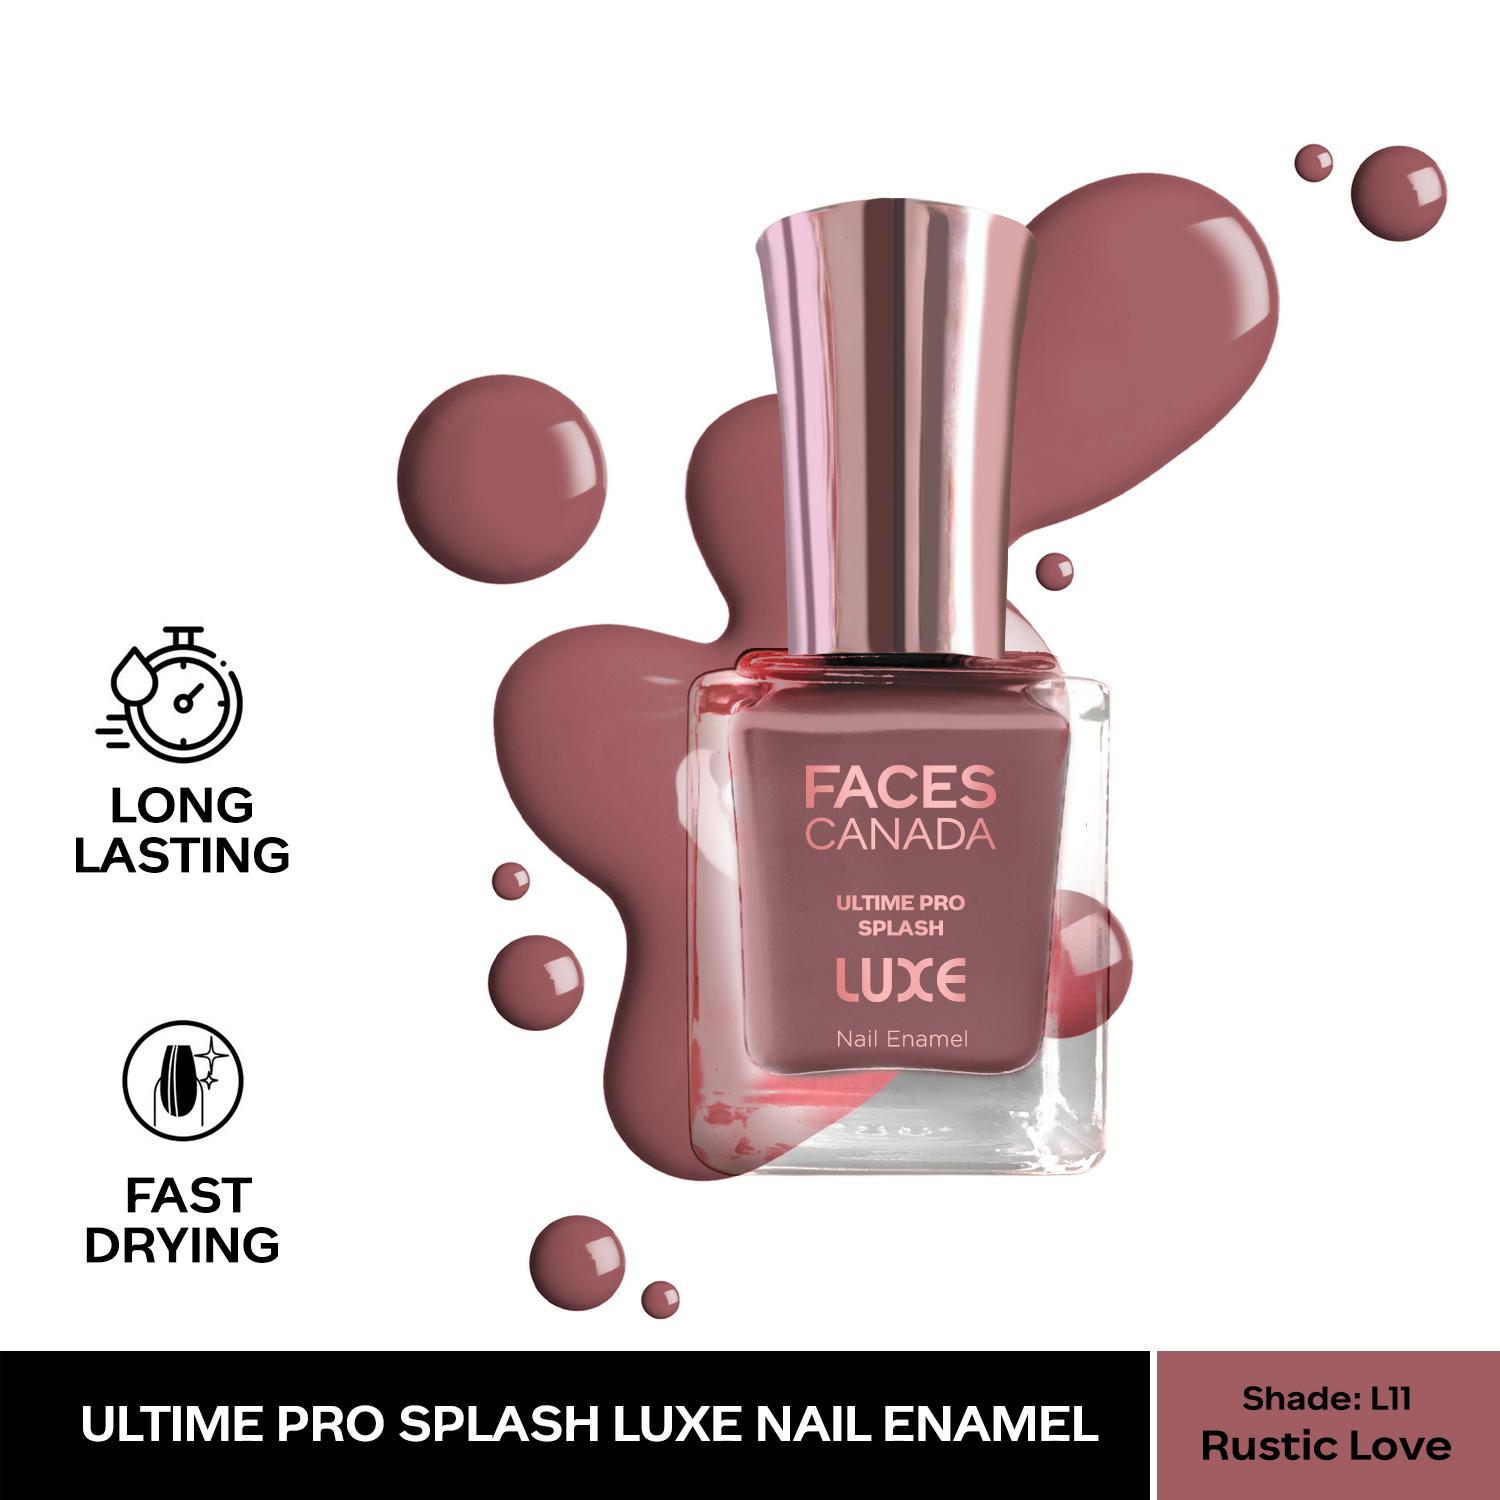 Faces Canada | Faces Canada Ultime Pro Splash Luxe Nail Enamel - Rustic Love (L11), Glossy Finish (12 ml)